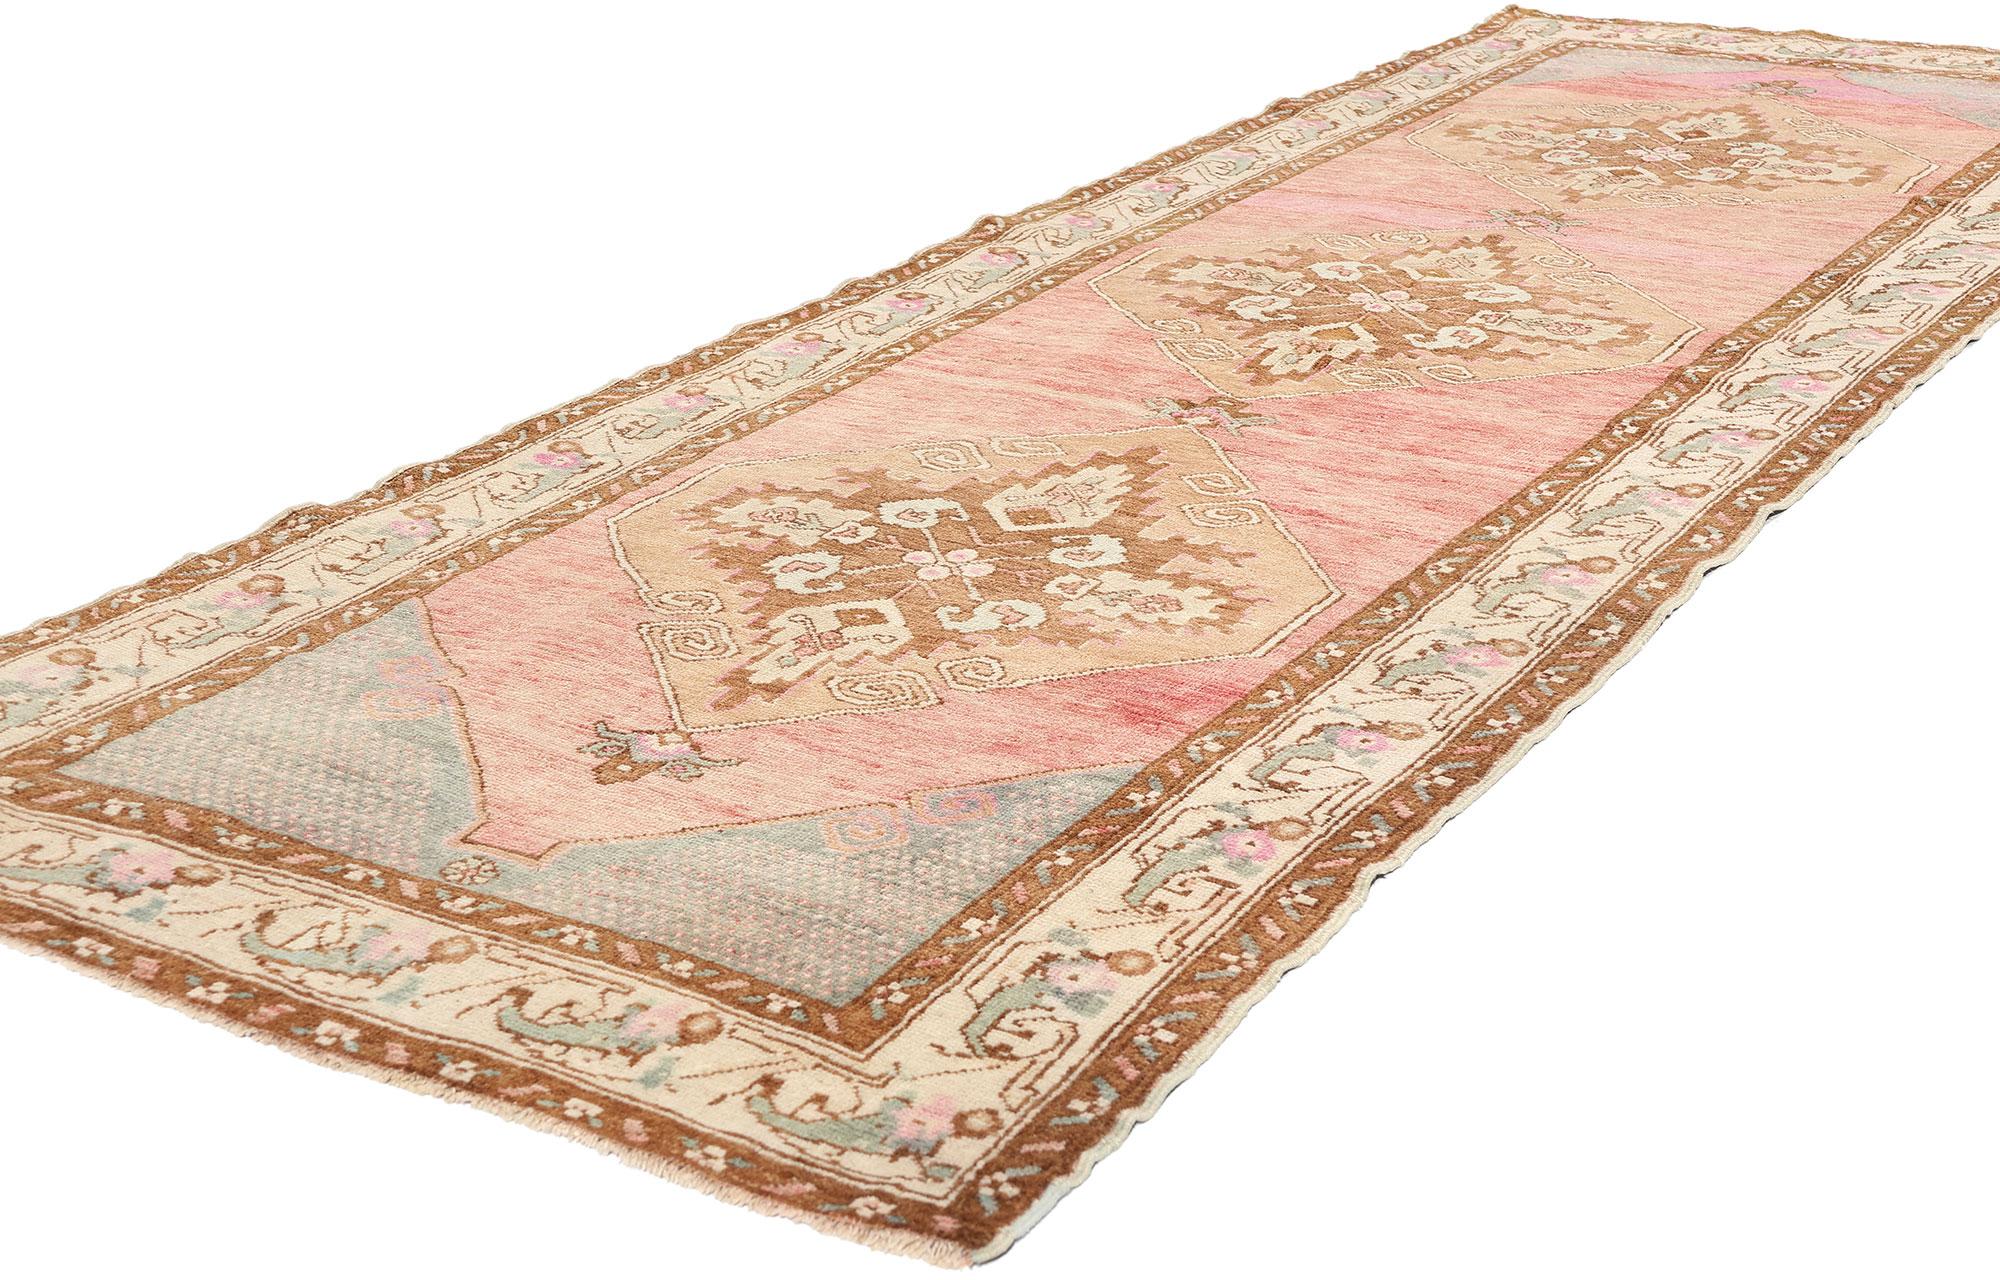 52805 Vintage Pink Turkish Oushak Rug, 03'05 x 09'11. Antique-washed Turkish Oushak carpet runners are a variant of traditional rugs originating from the Oushak region in western Turkey, which undergo a unique washing process to achieve an antique